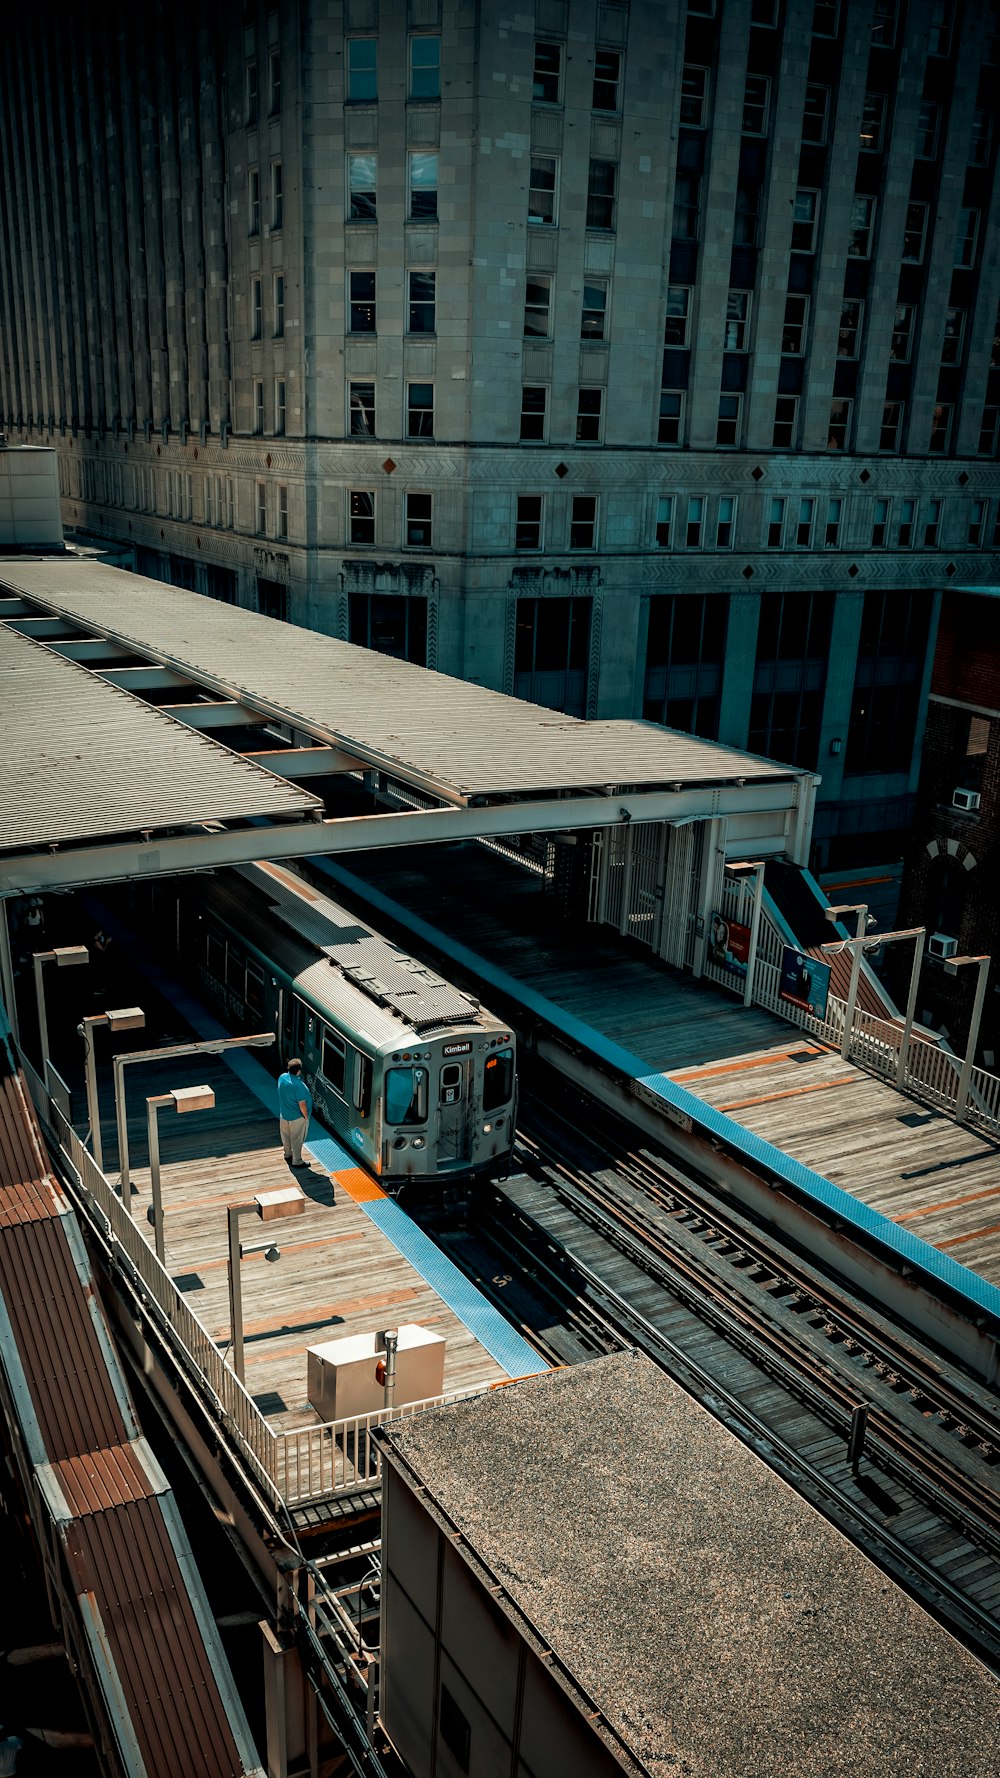 a train traveling through a train station next to tall buildings